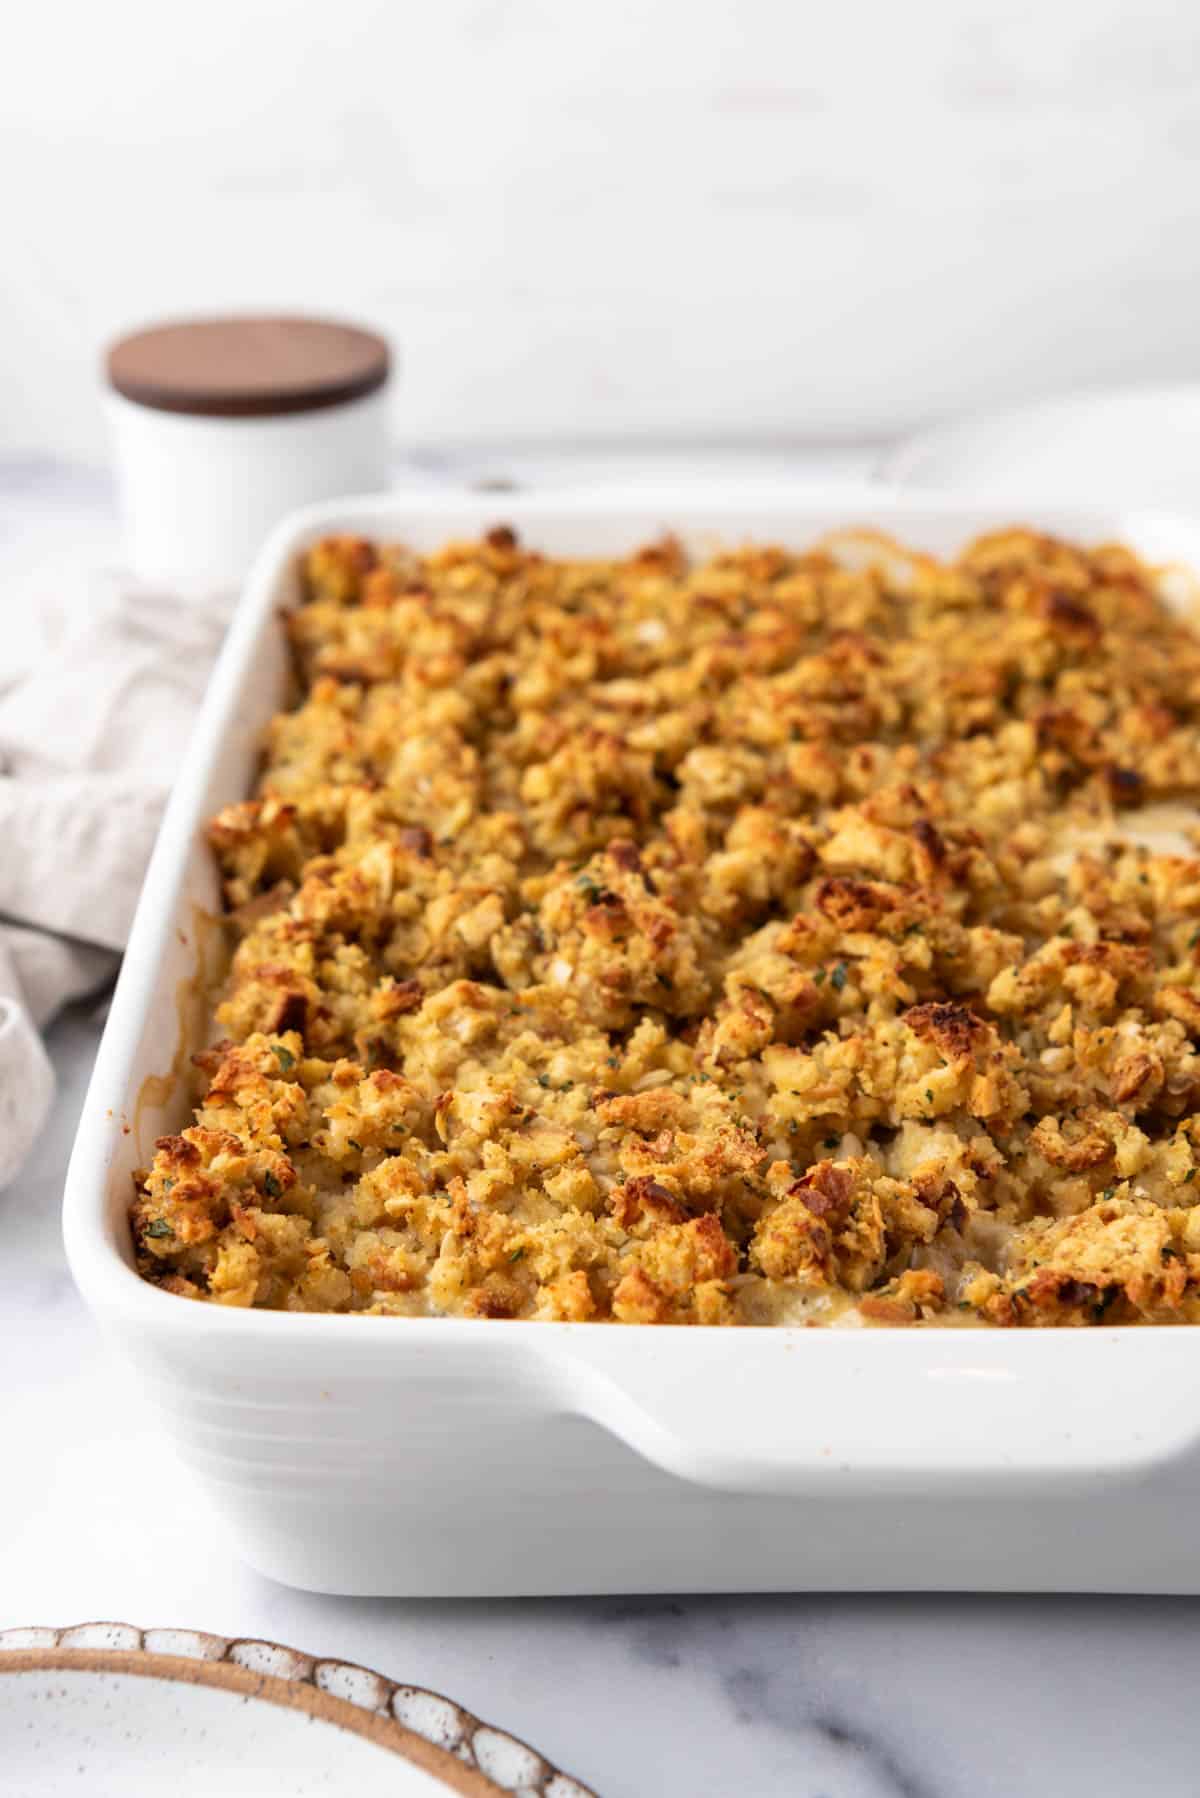 A baked chicken and stuffing casserole in a white baking dish.